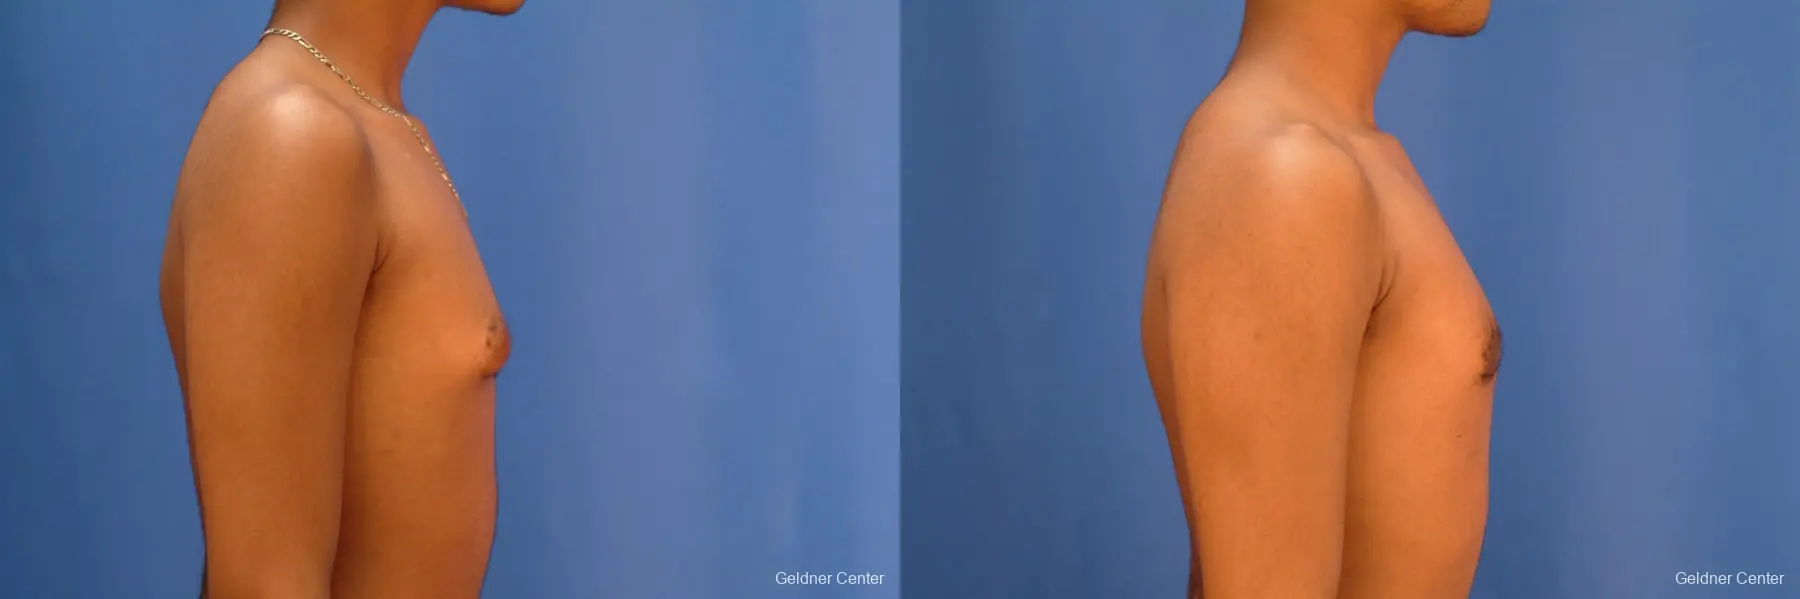 Gynecomastia: Patient 5 - Before and After 2